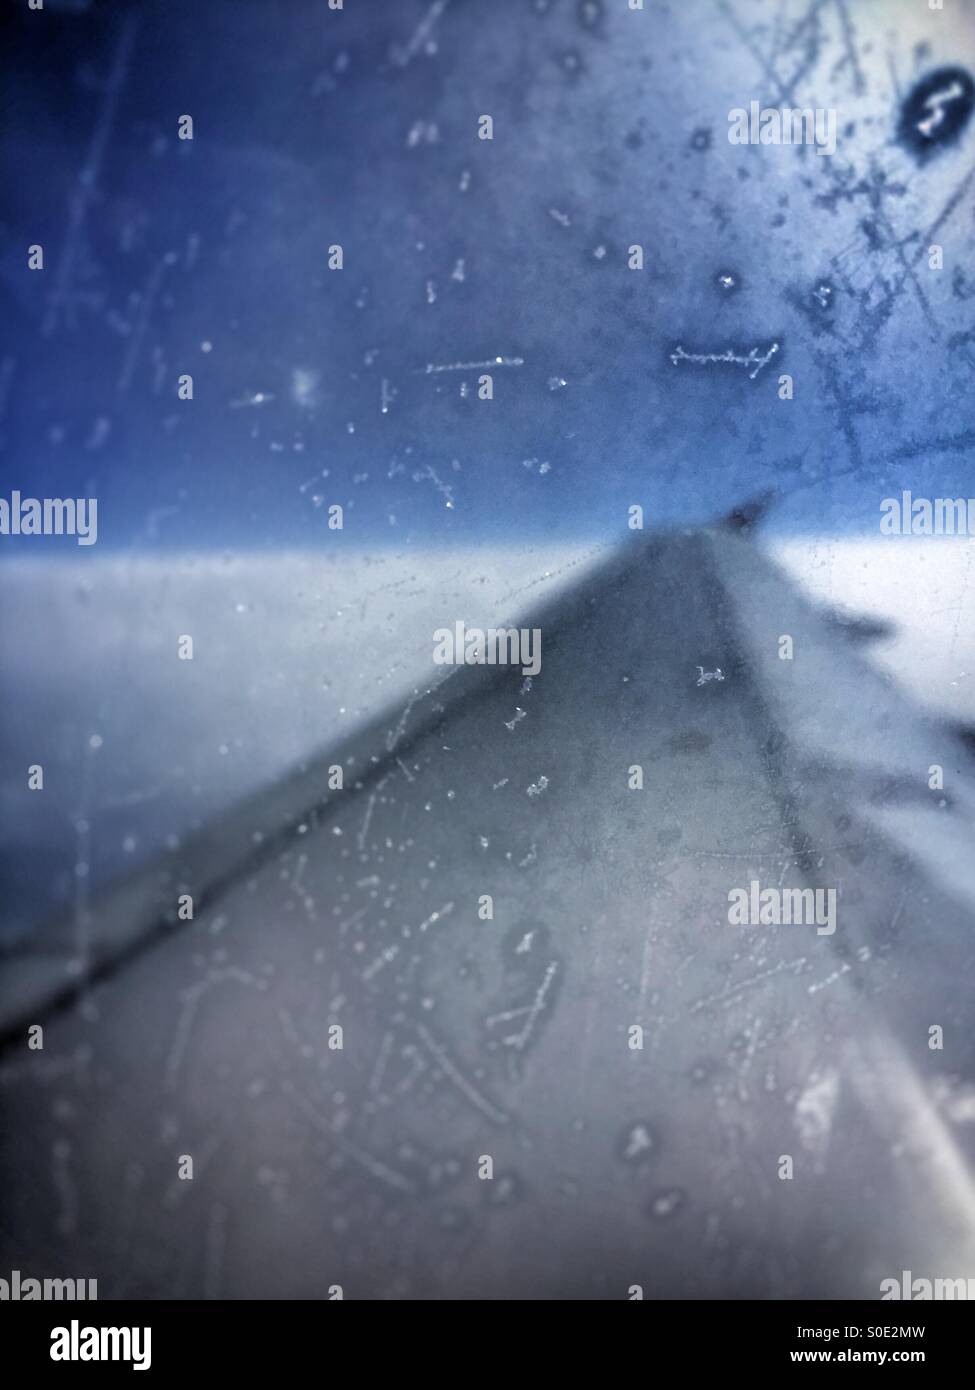 View over wing of passenger aeroplane, dramatic treatment, scratched, frosted window. Stock Photo